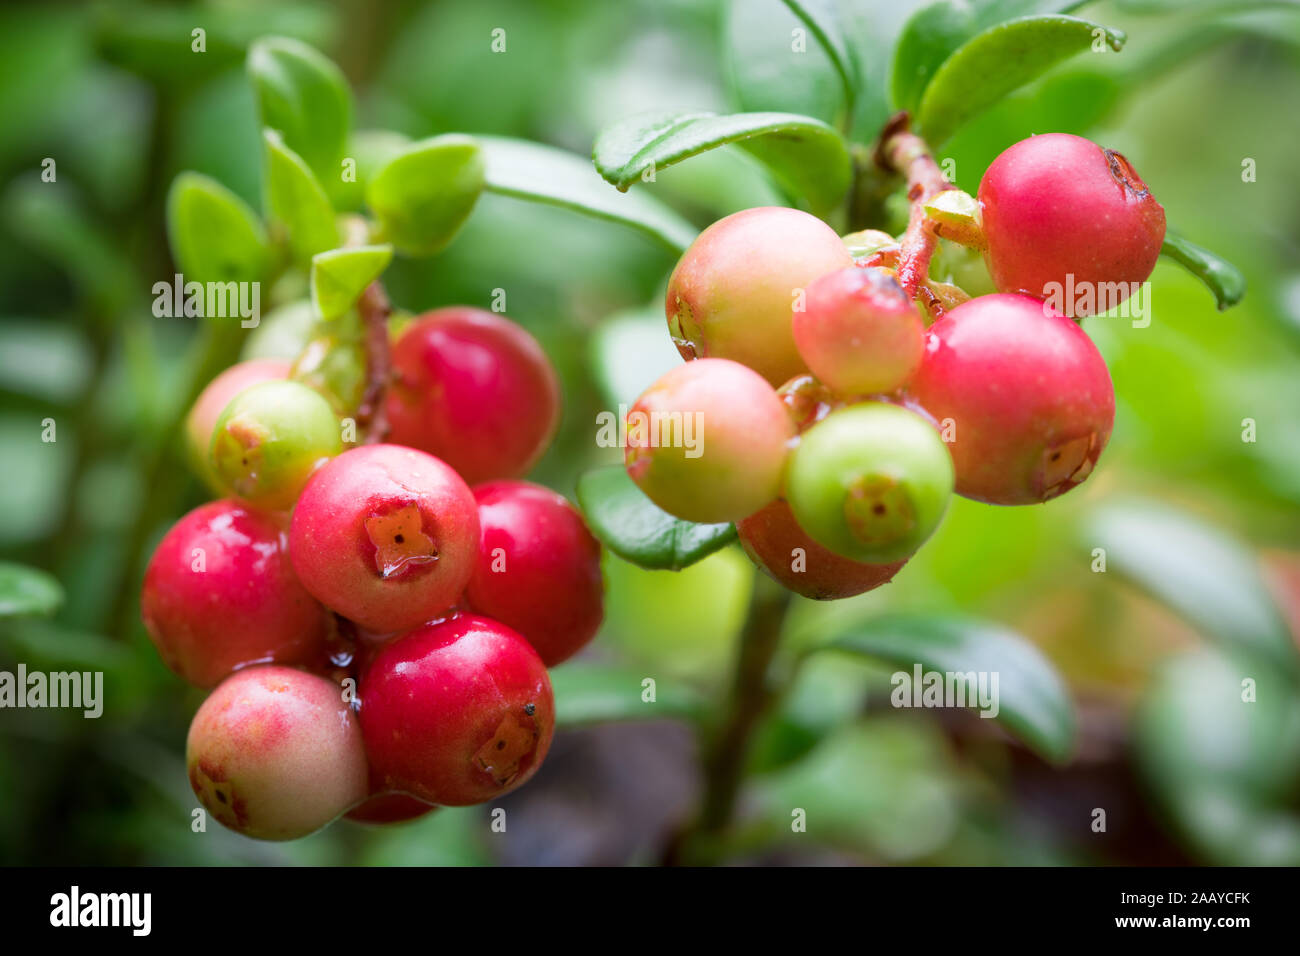 Details of cowberry (Vaccinium vitis-idaea) outside on the plant with stem and leaves on unsharp natural background Stock Photo